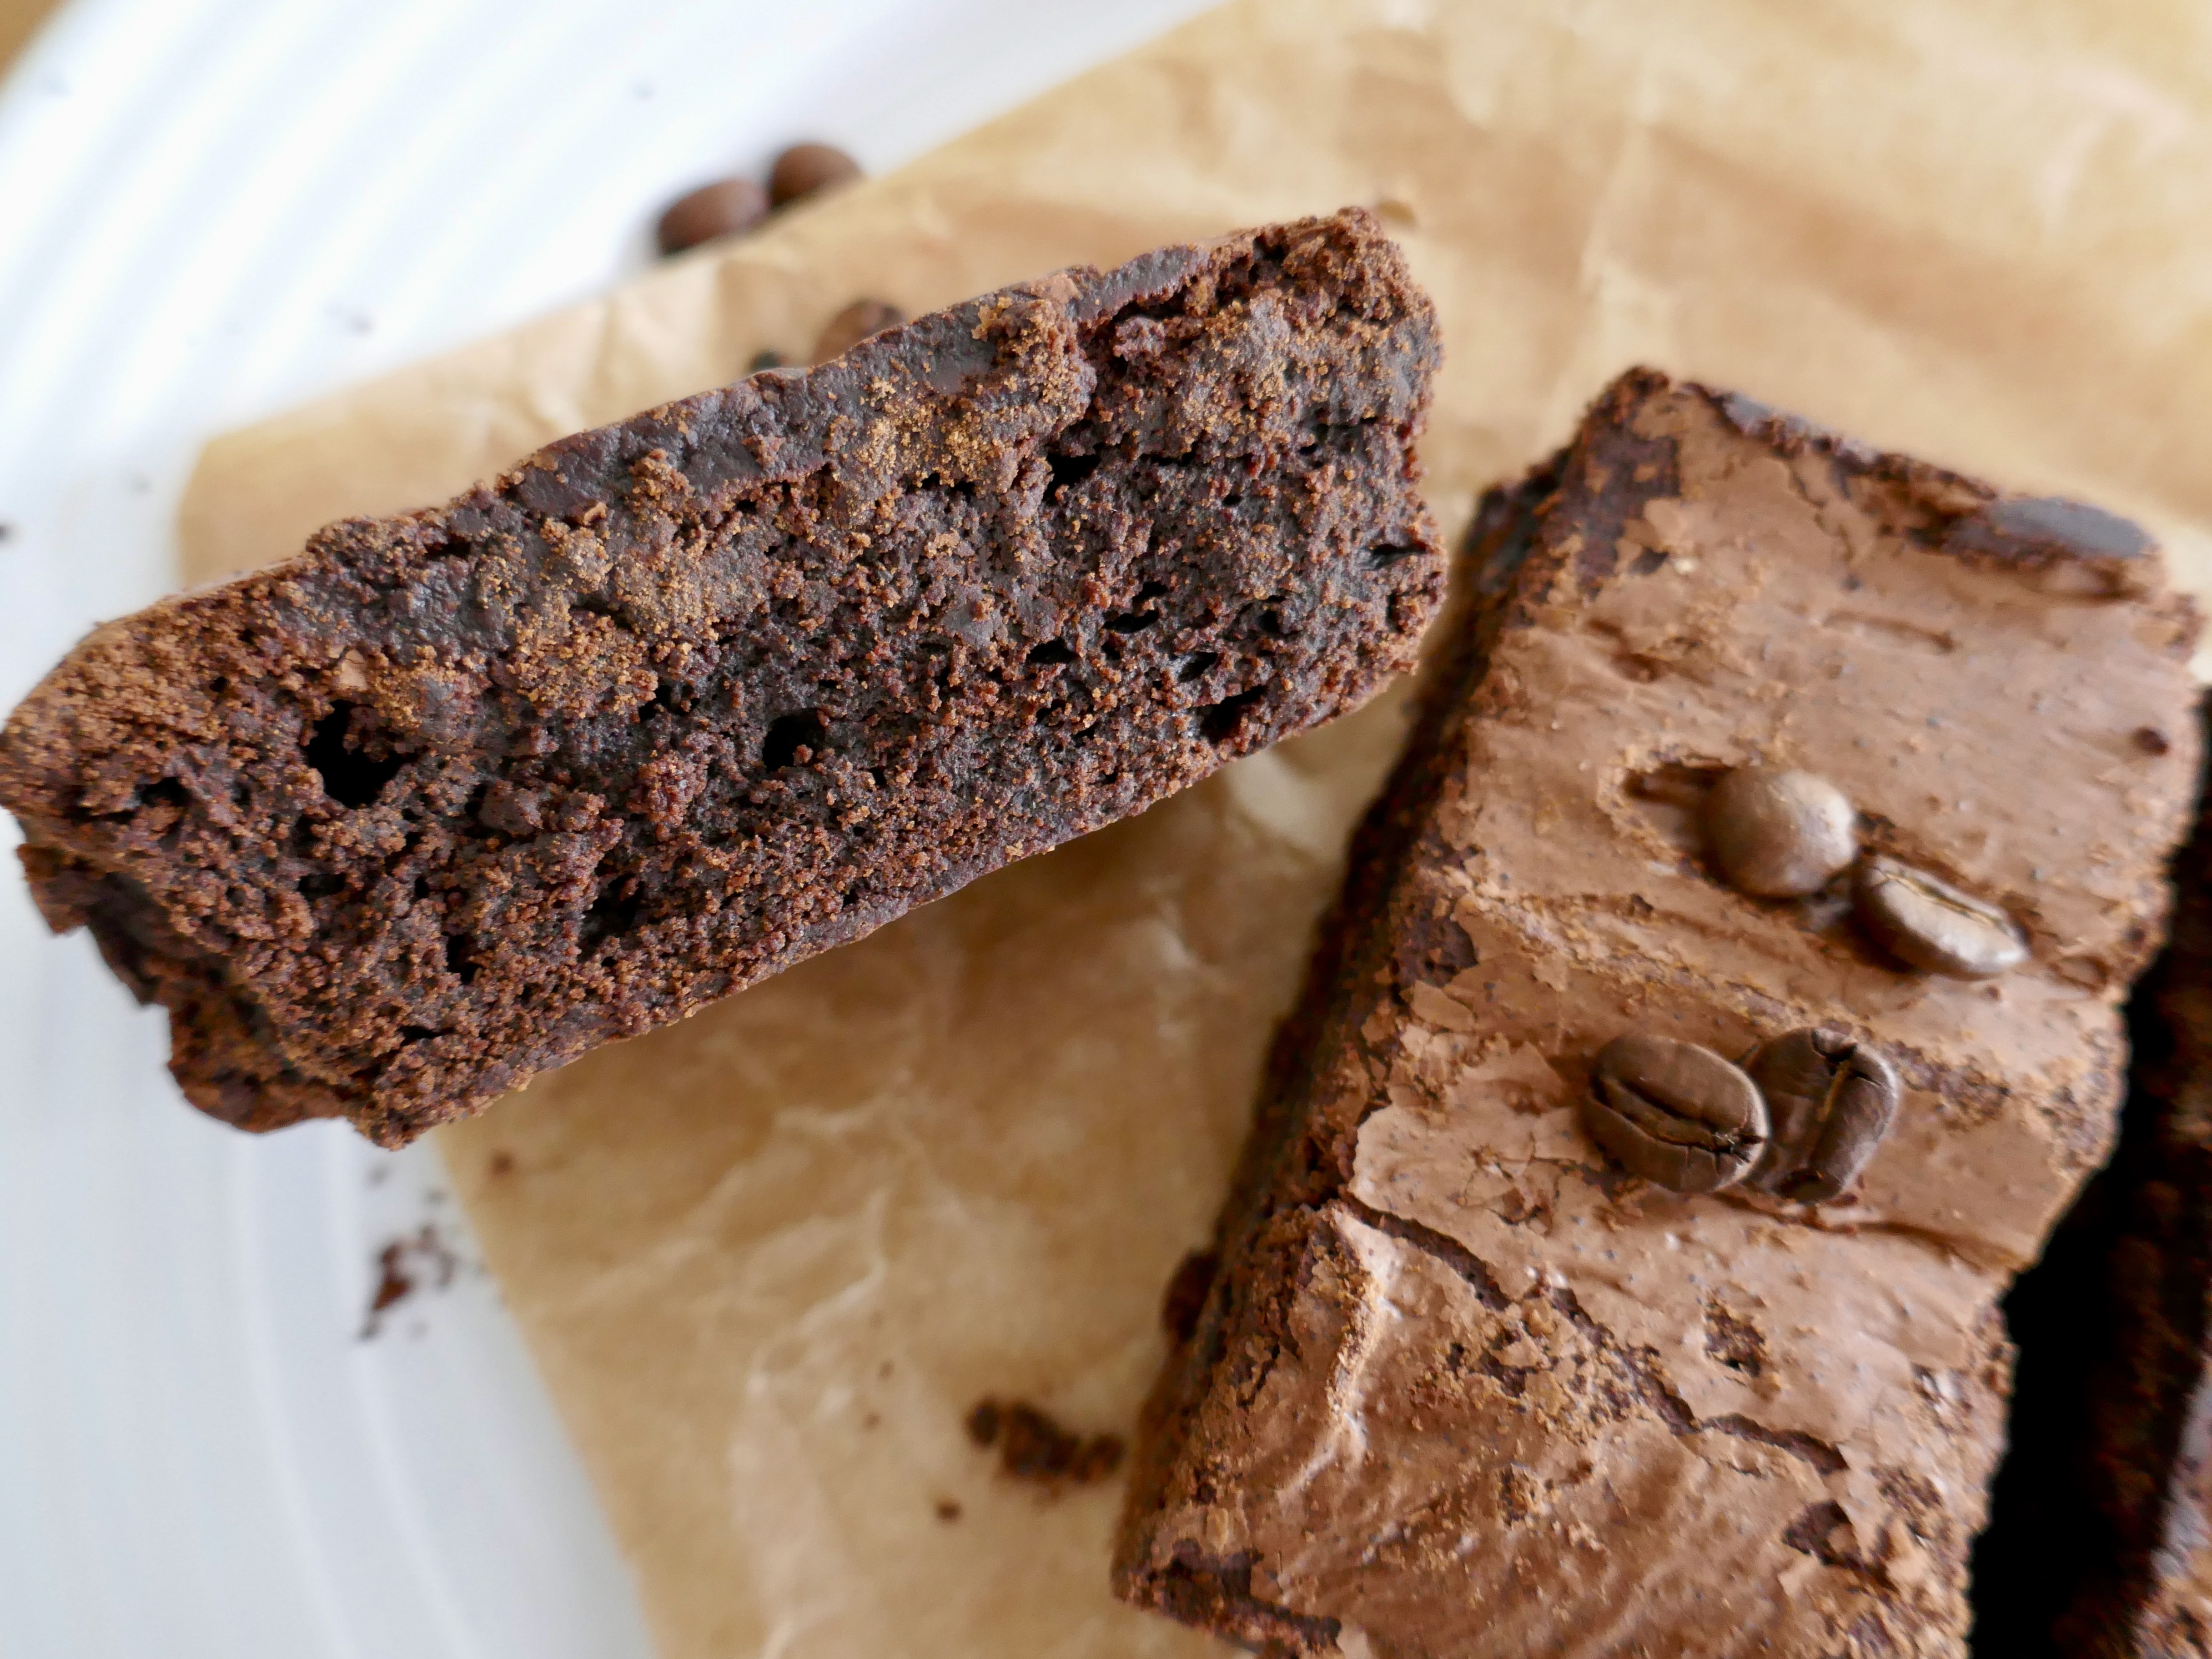 How to make pot brownies on BakeSpace.com